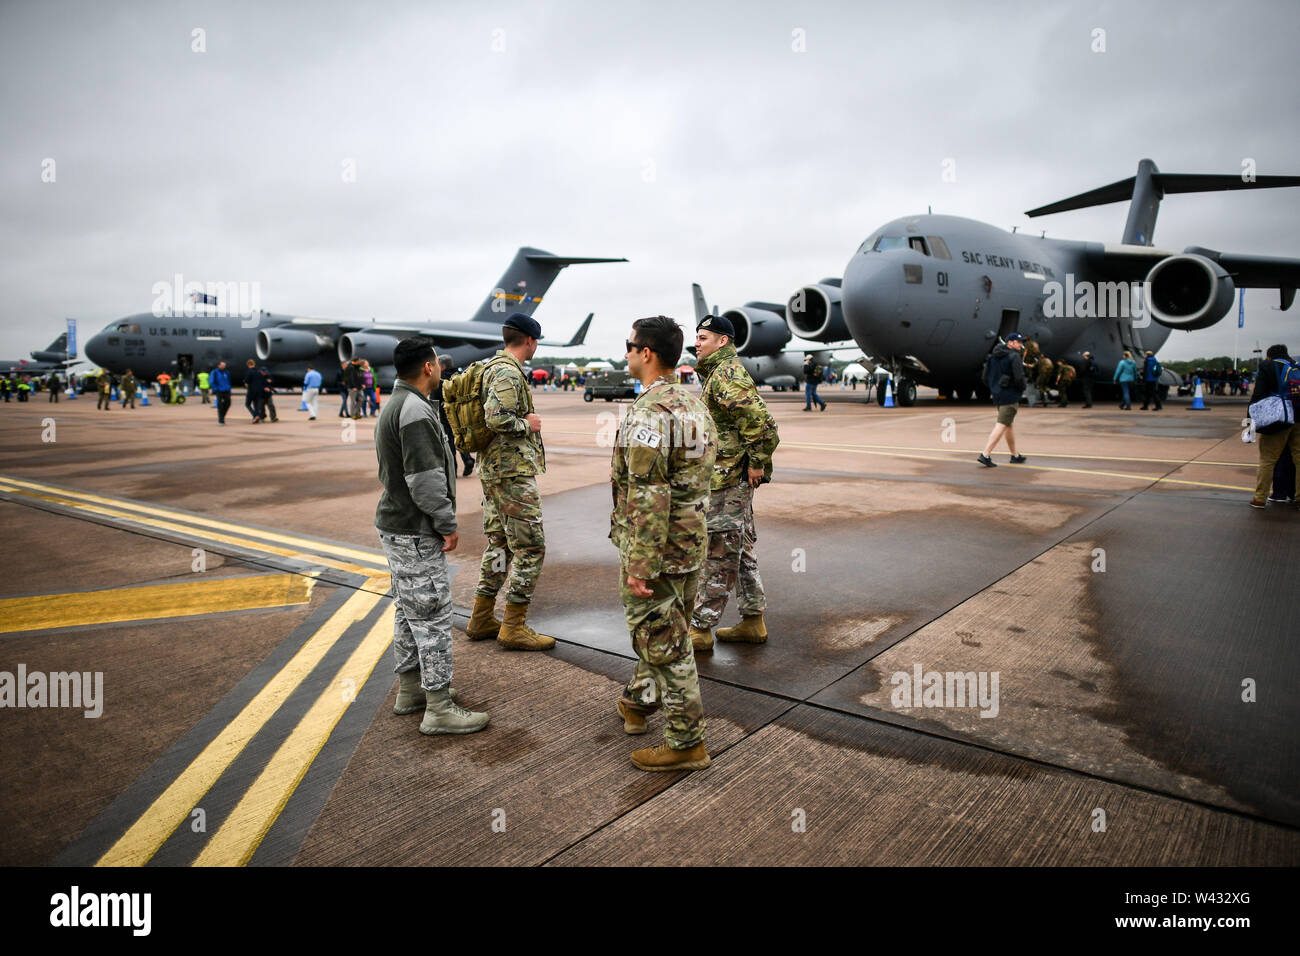 Military personnel chat in the static display aircraft area at the Royal International Air Tattoo, RAF Fairford, as bad weather including strong winds, low cloud and rain have grounded many of the planned air displays. Stock Photo